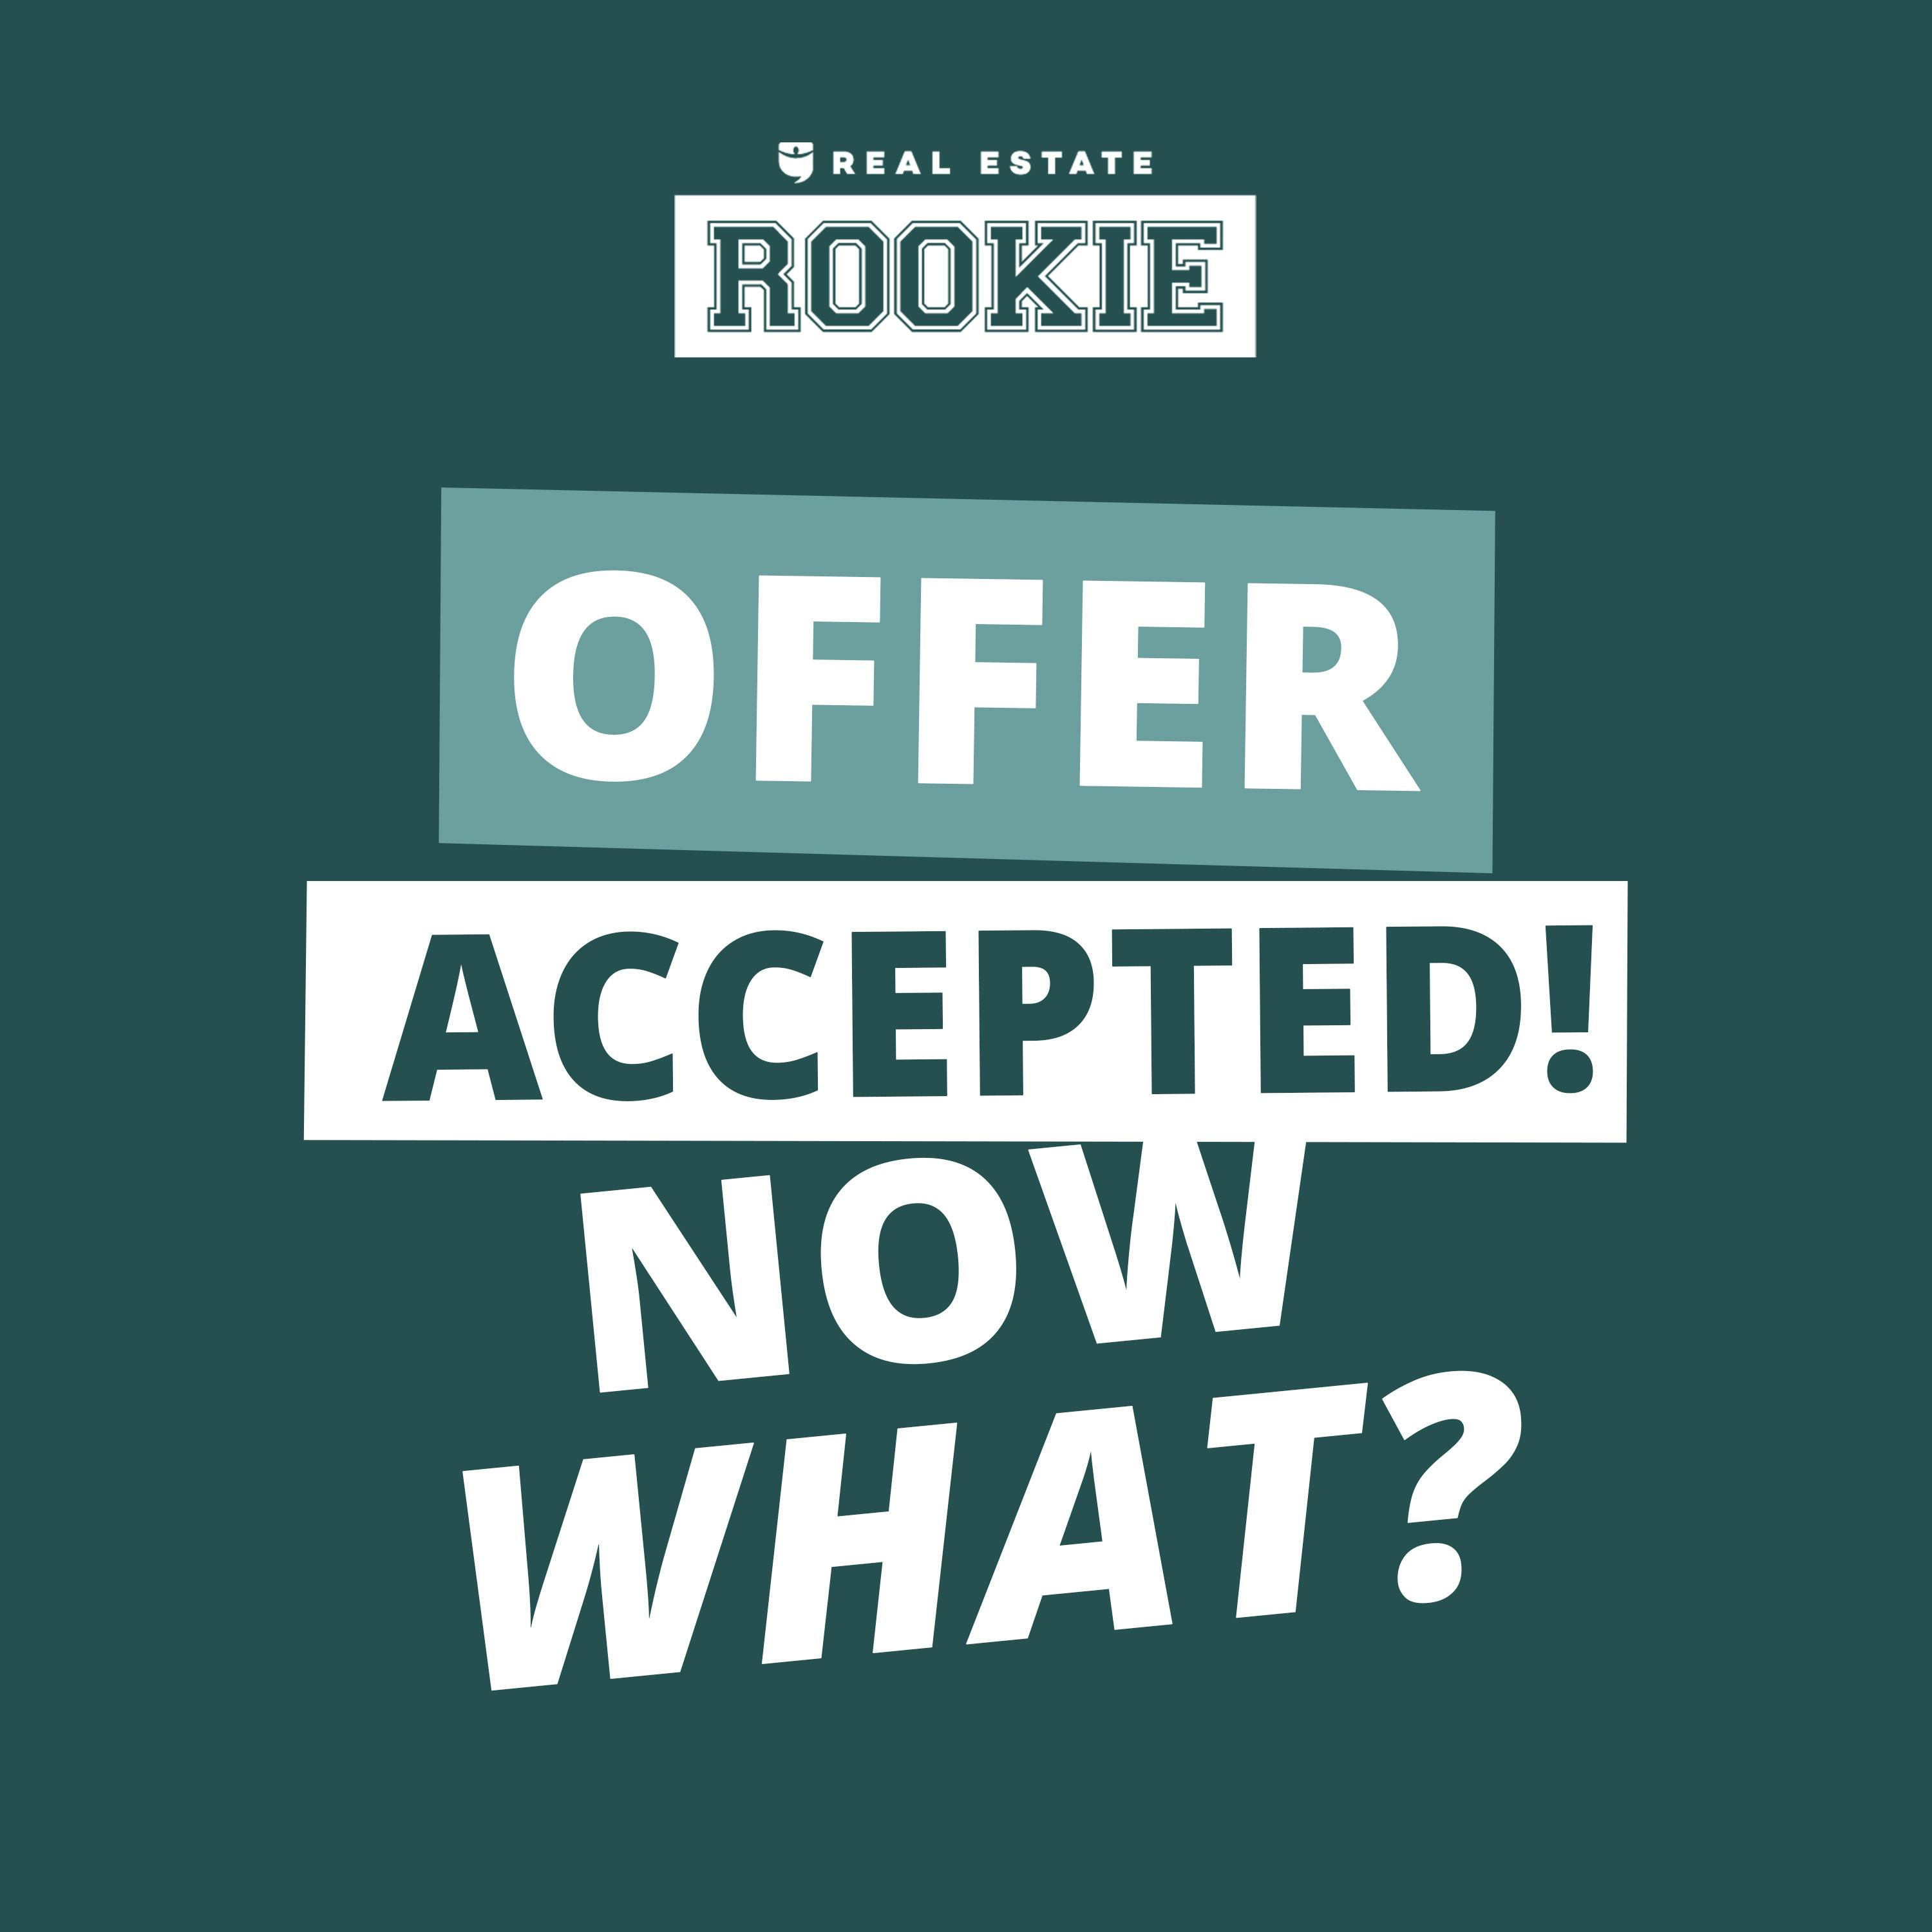 263: Rookie to Real Estate Investor: House Offer Accepted! Now What?